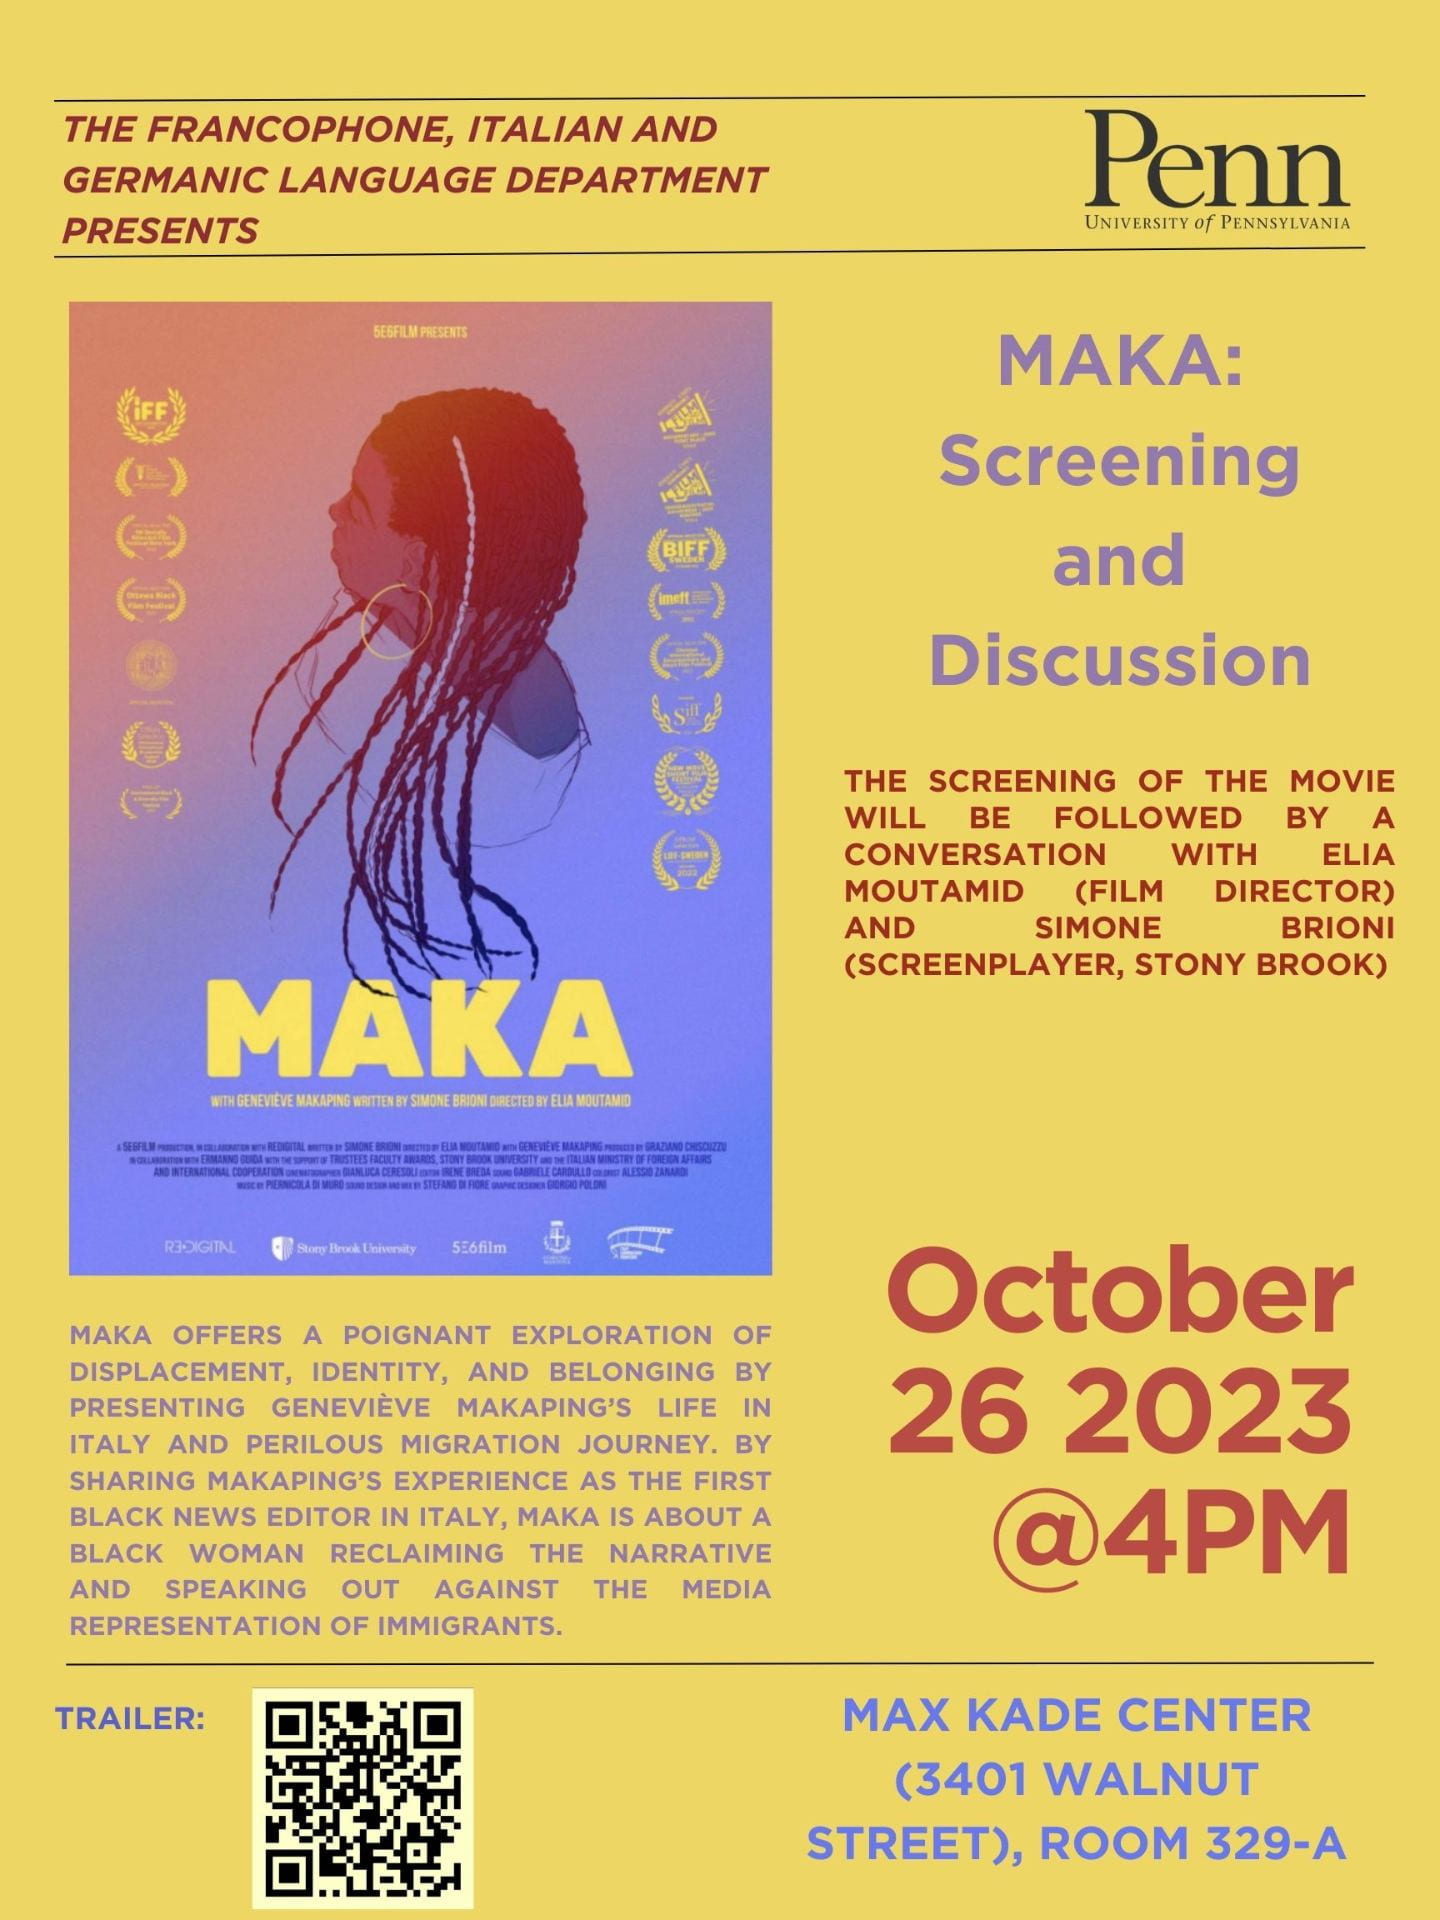 Maka event poster